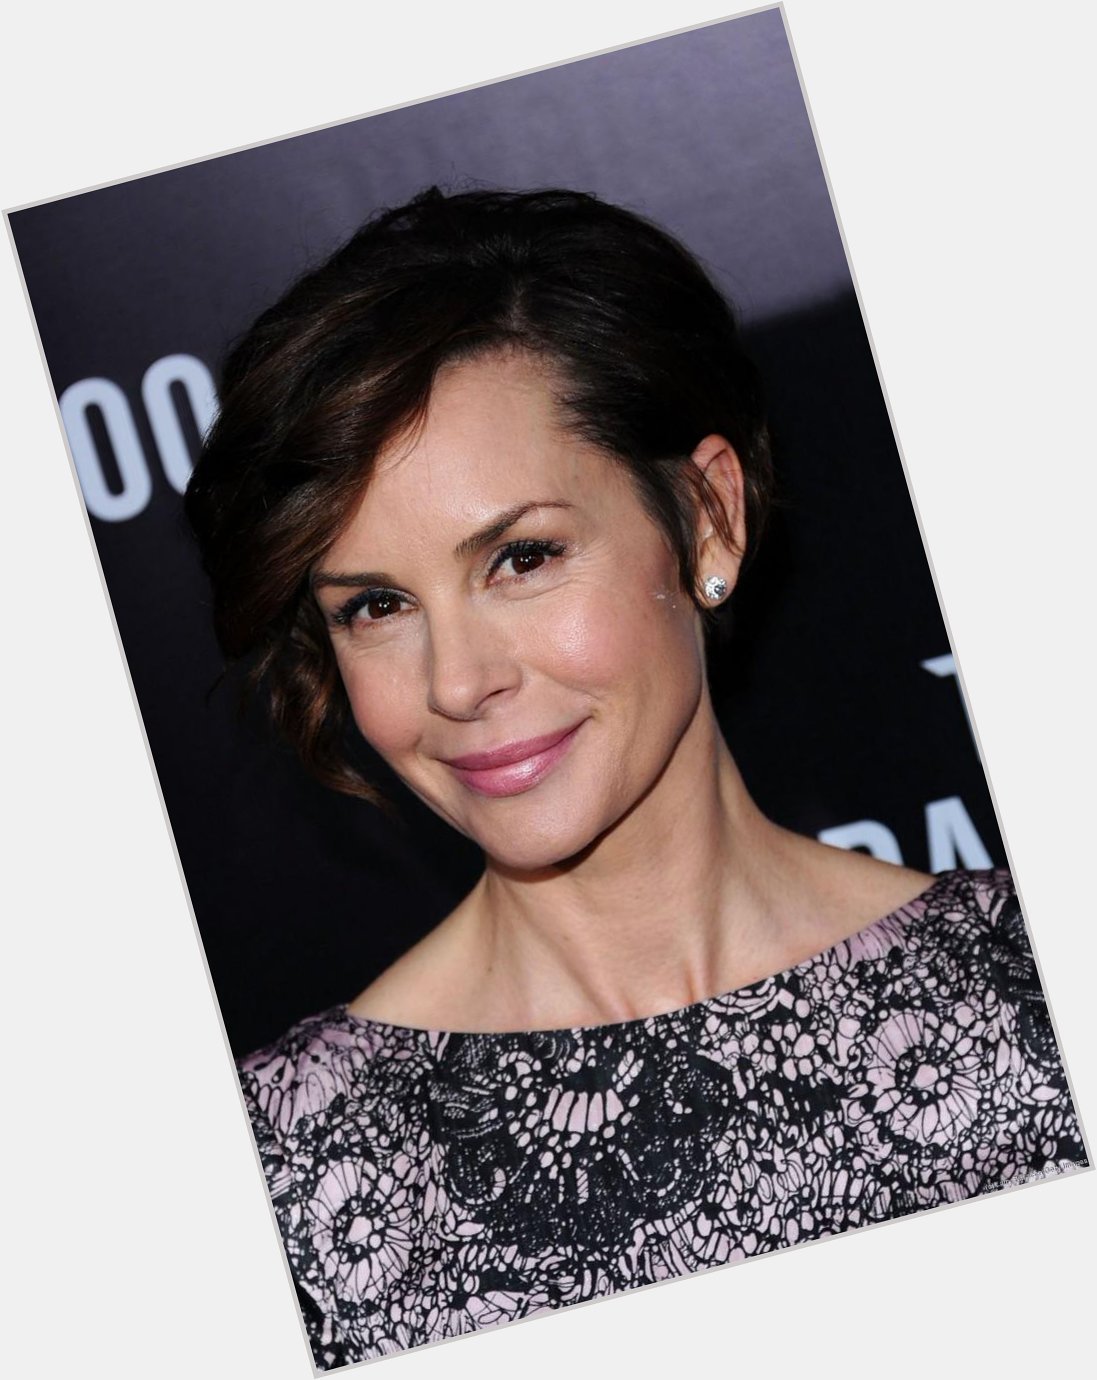 Happy Birthday, Embeth Davidtz! Born in Lafayette, the actress is known for Schindler\s List, Matilda & Mad Men. 